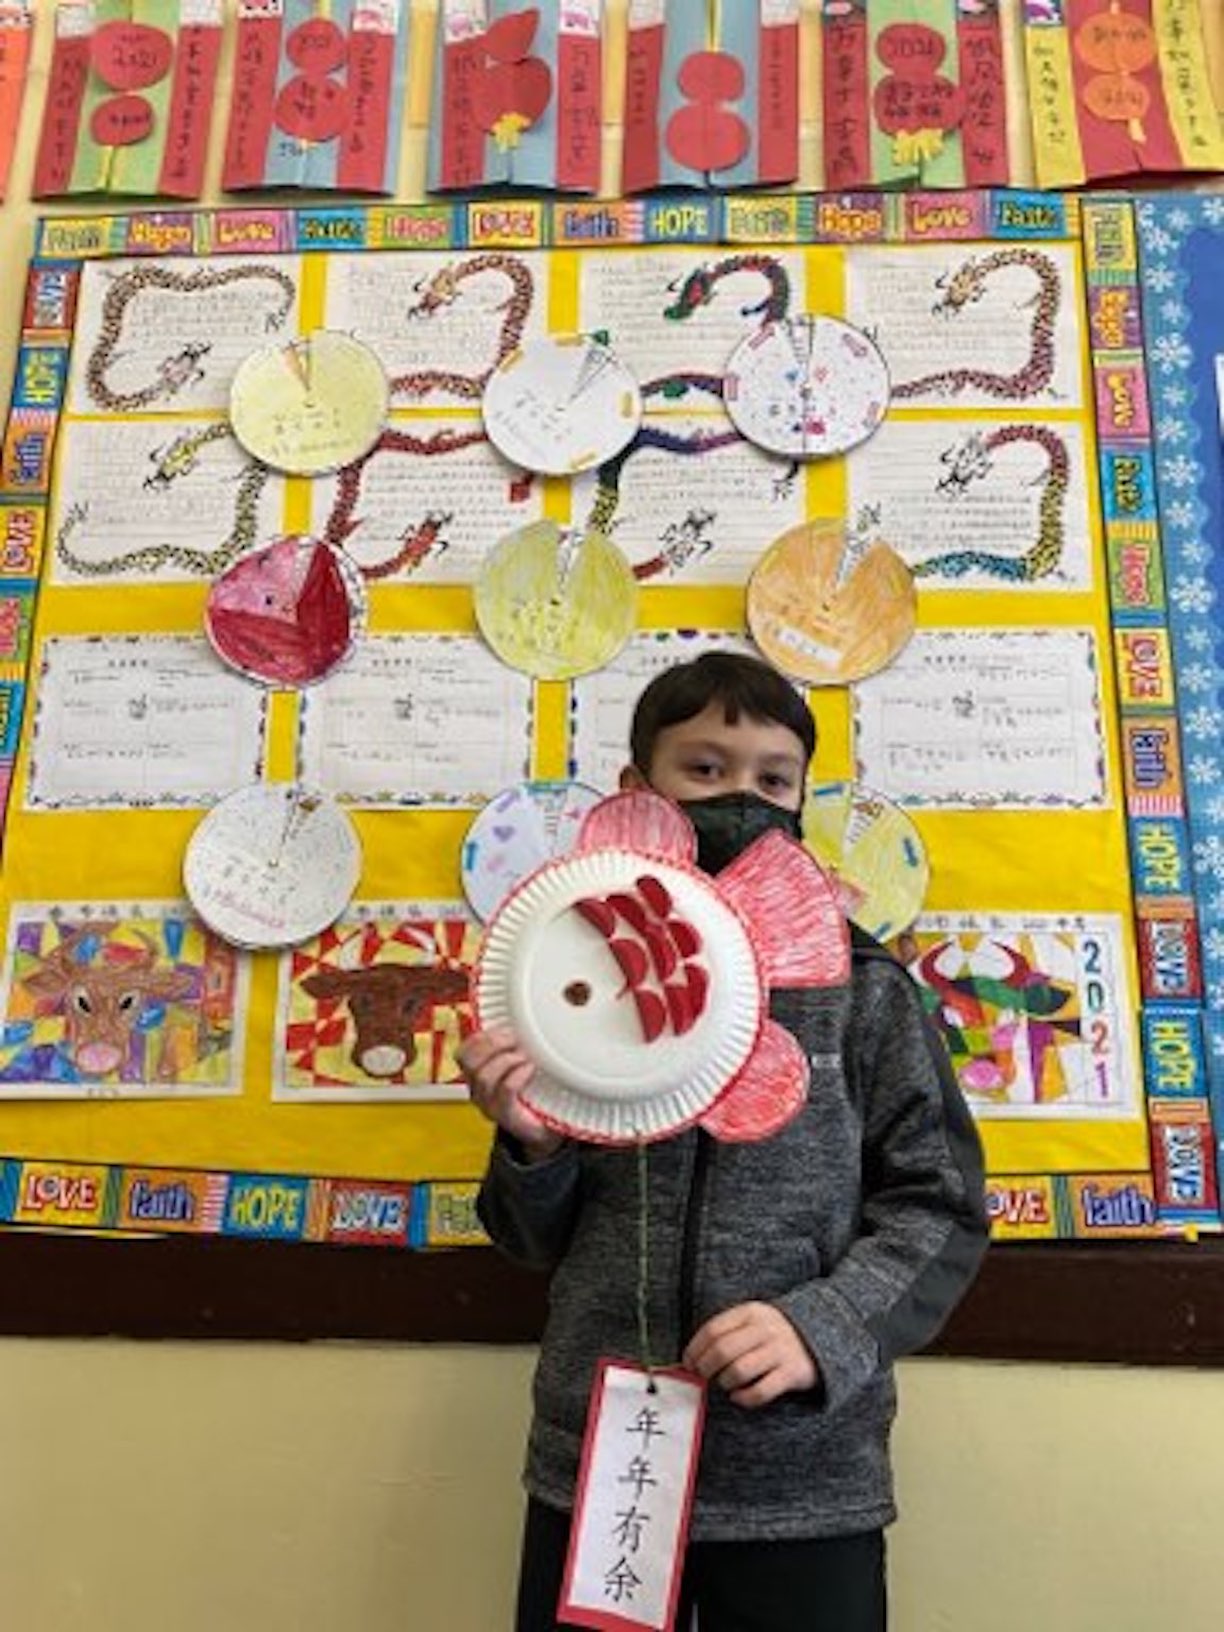 QUEENS CATHOLIC SCHOOL STUDENTS CELEBRATE CHINESE NEW YEAR